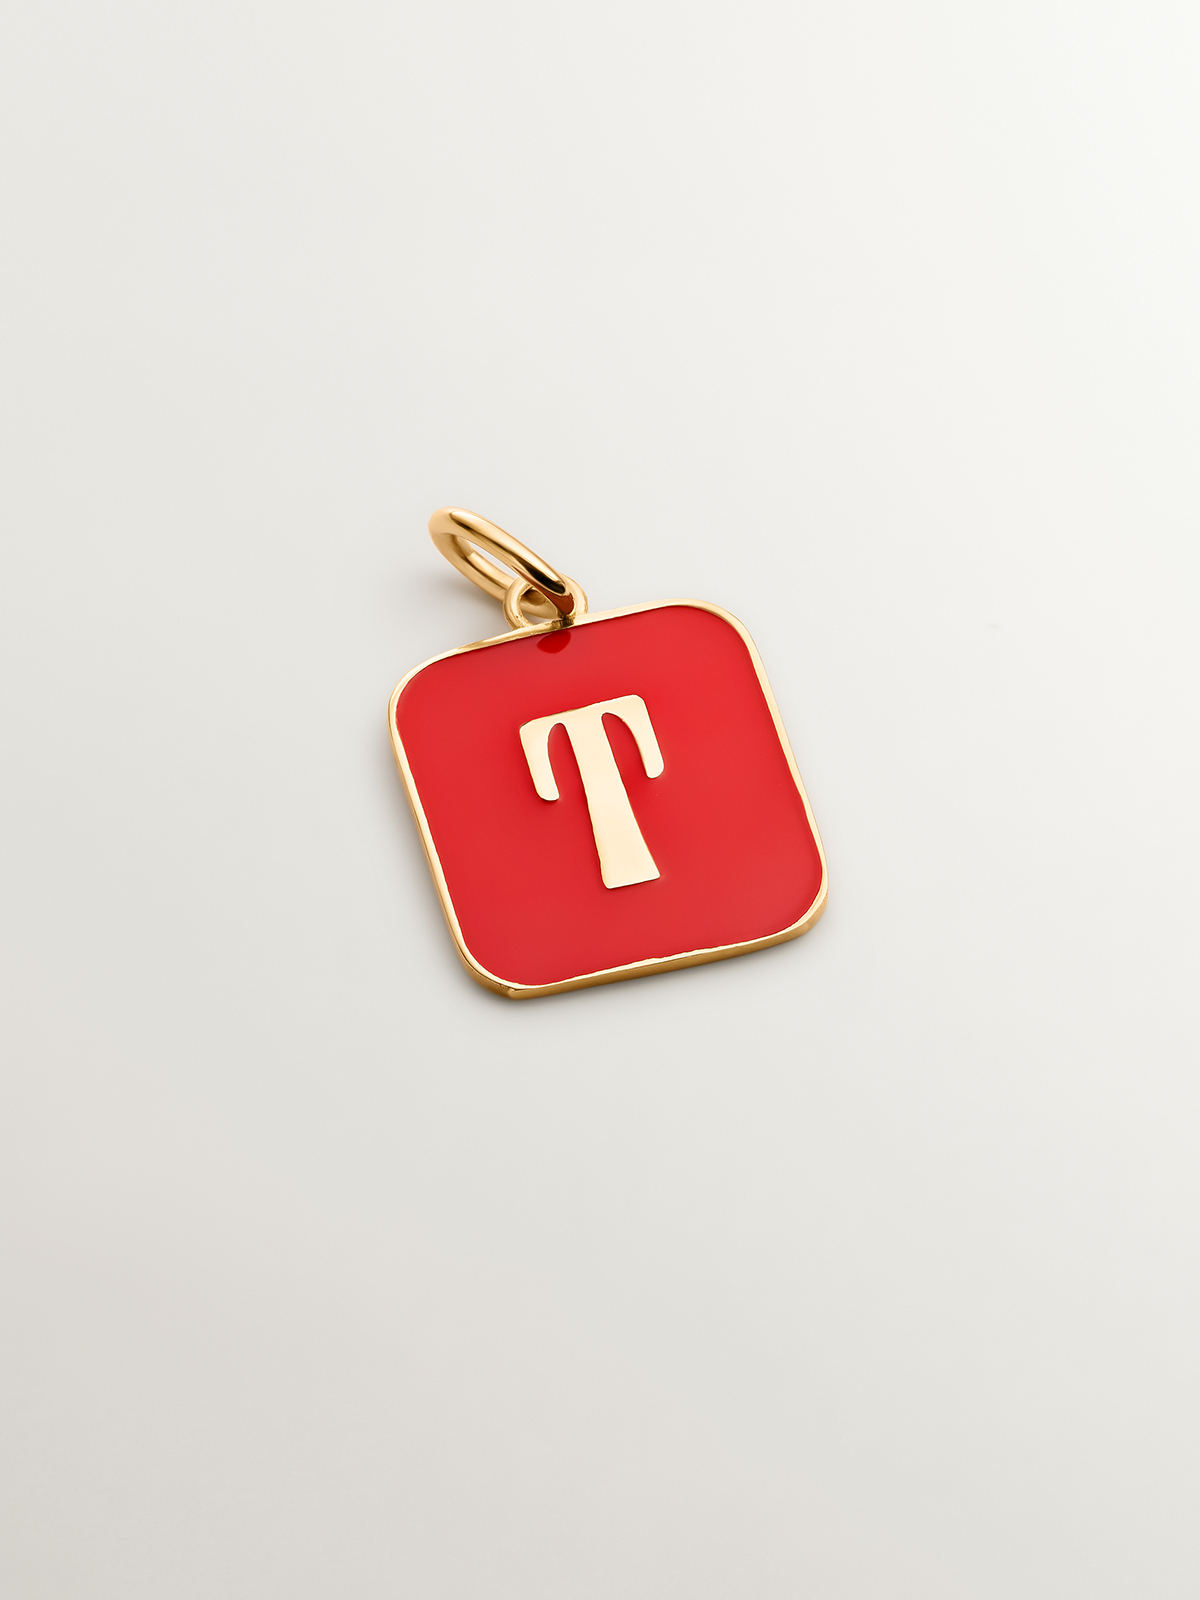 18K yellow gold plated 925 sterling silver charm with T initial and red enamel in square shape